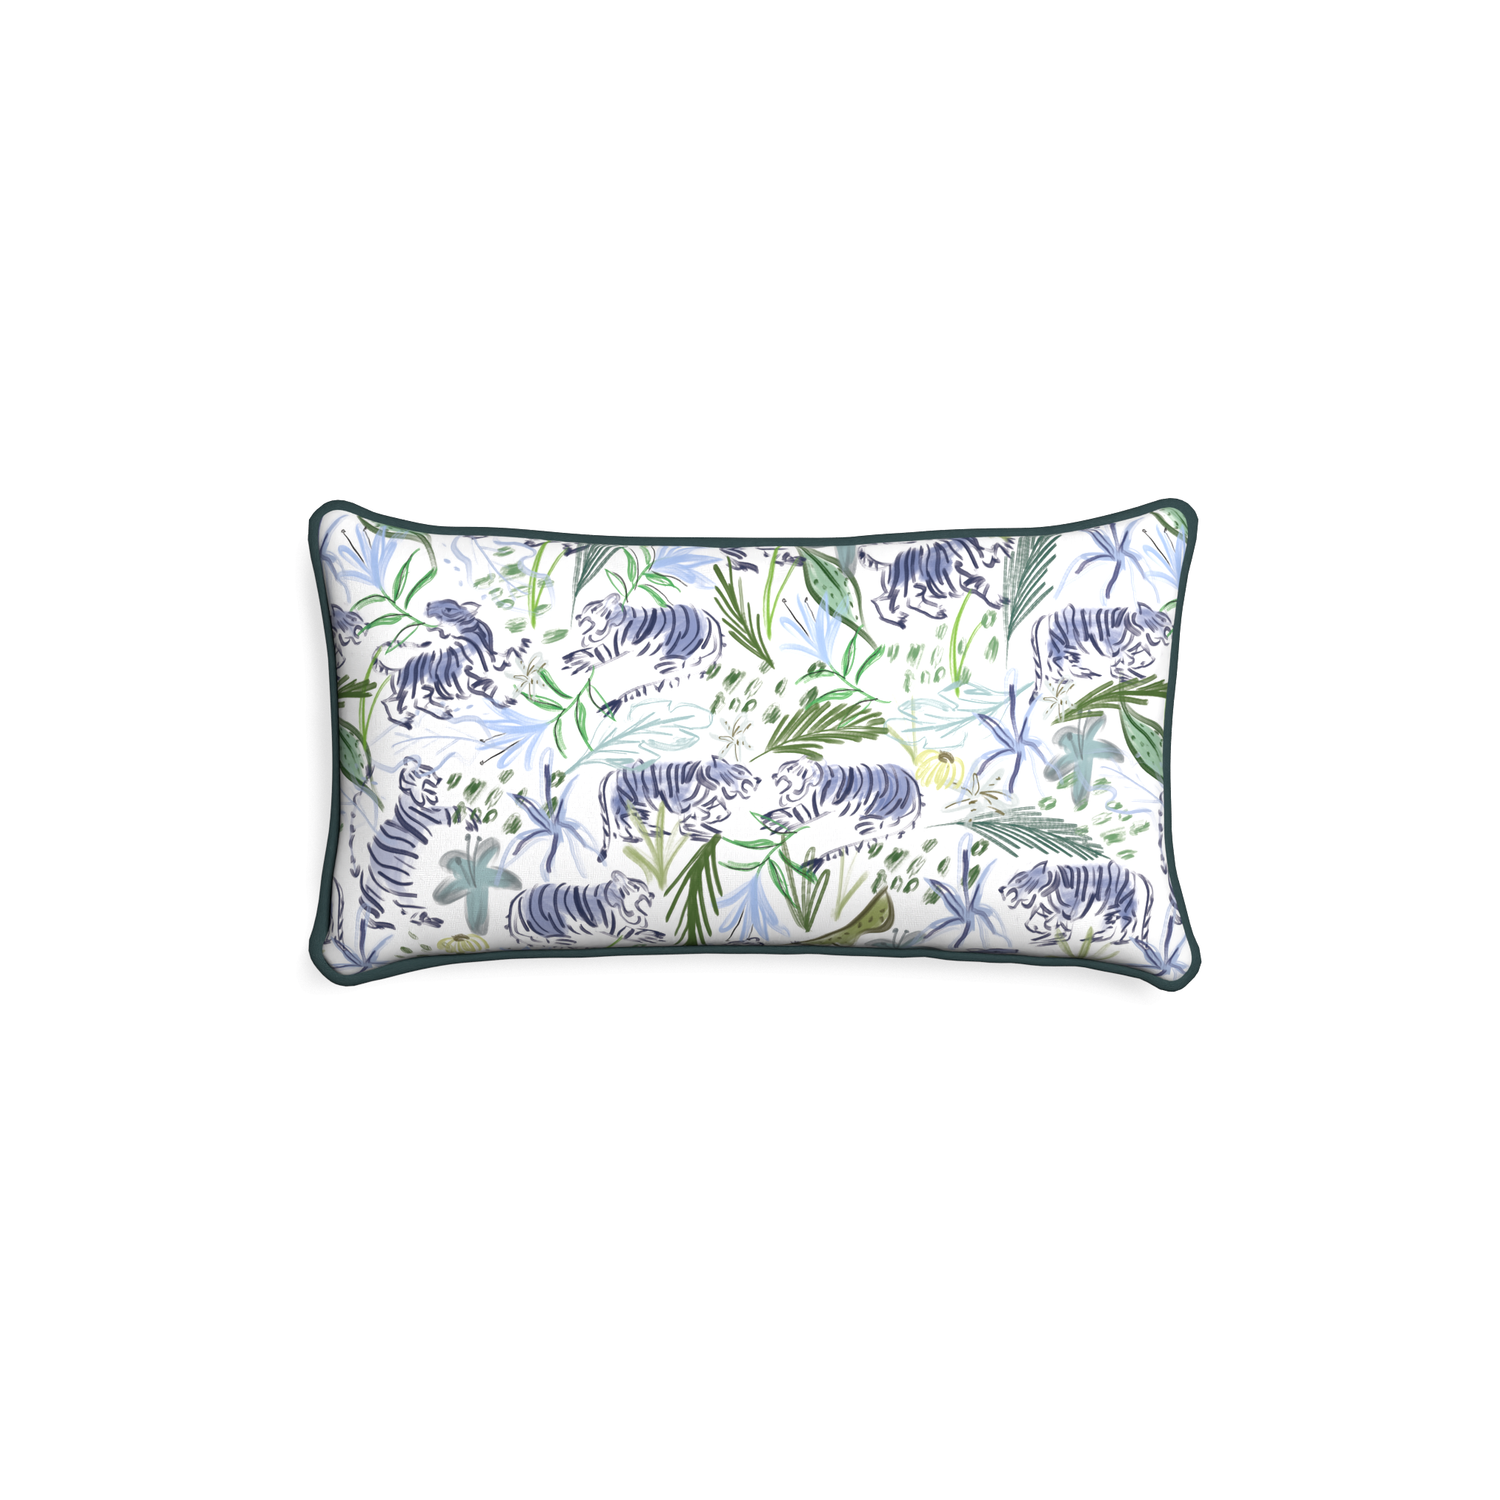 Petite-lumbar frida green custom green tigerpillow with p piping on white background